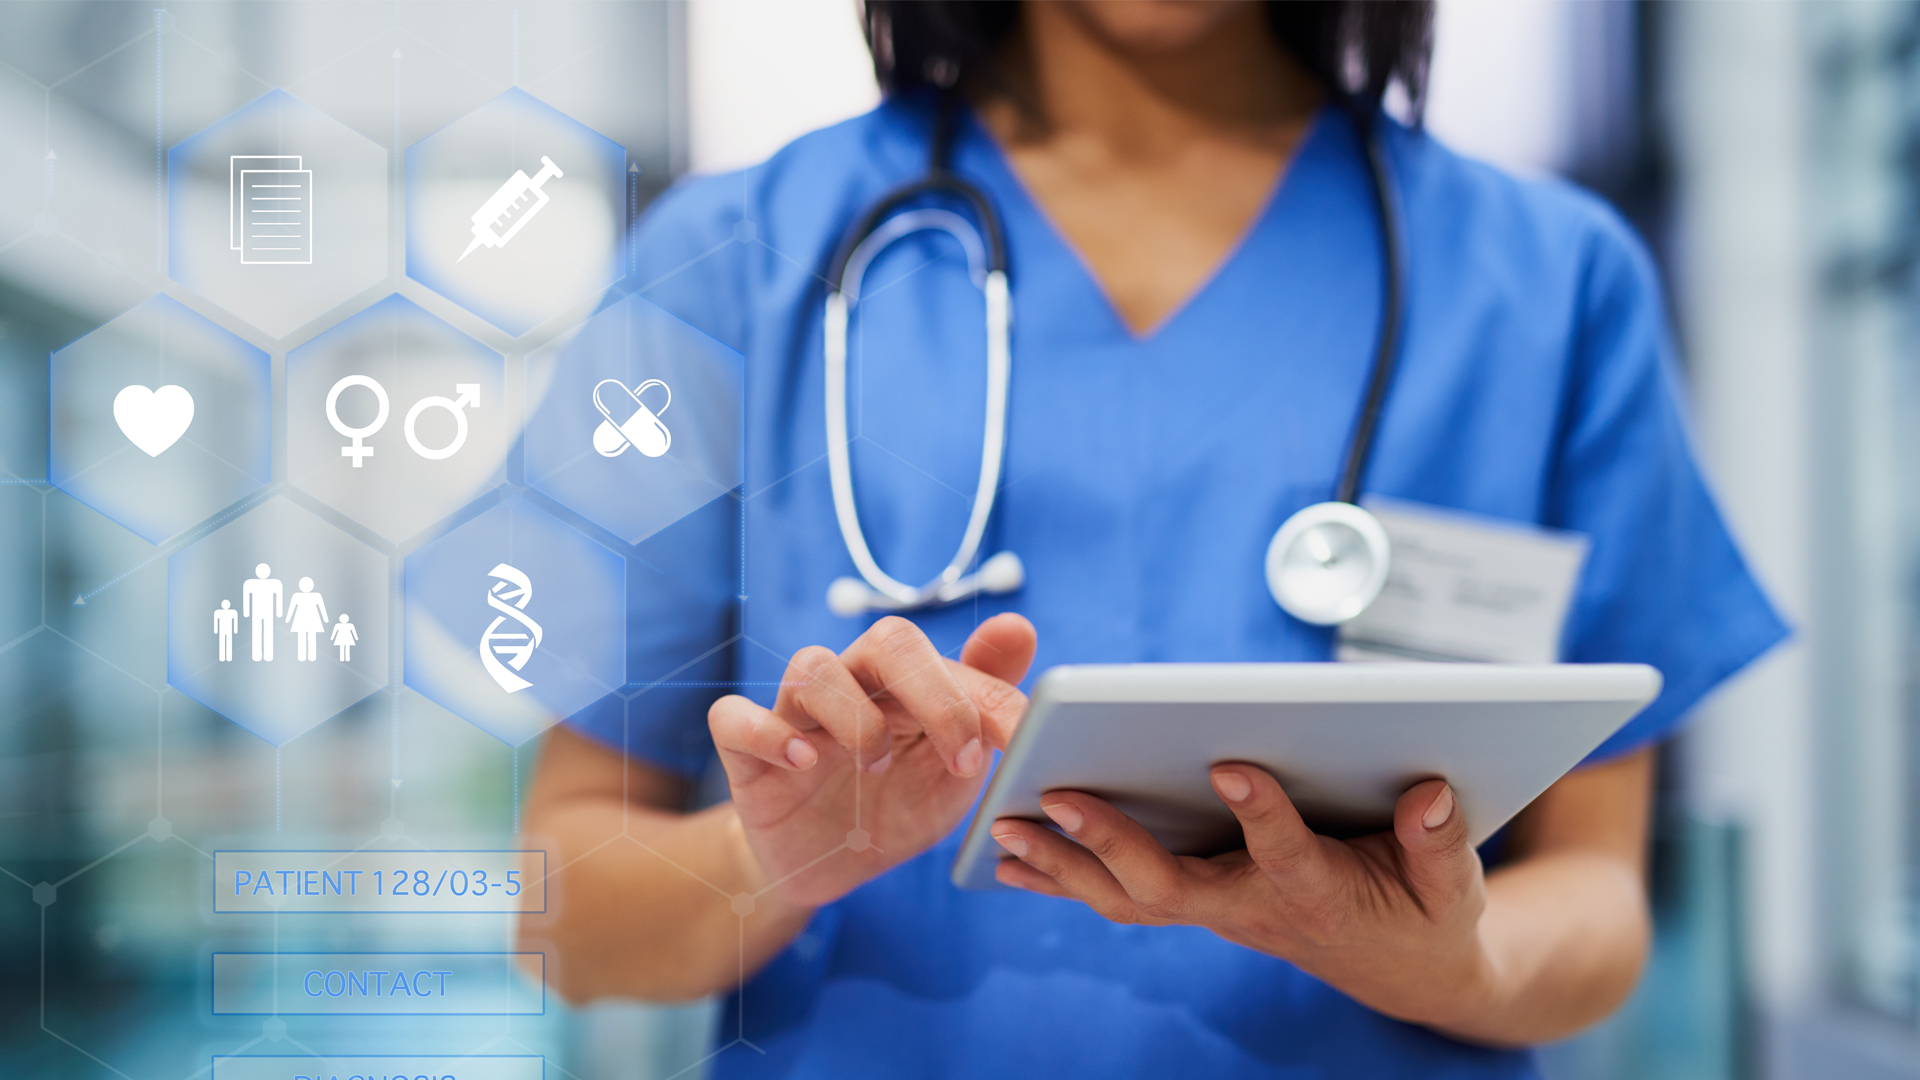 Global digital healthcare market to surpass $234.5bn by 2023